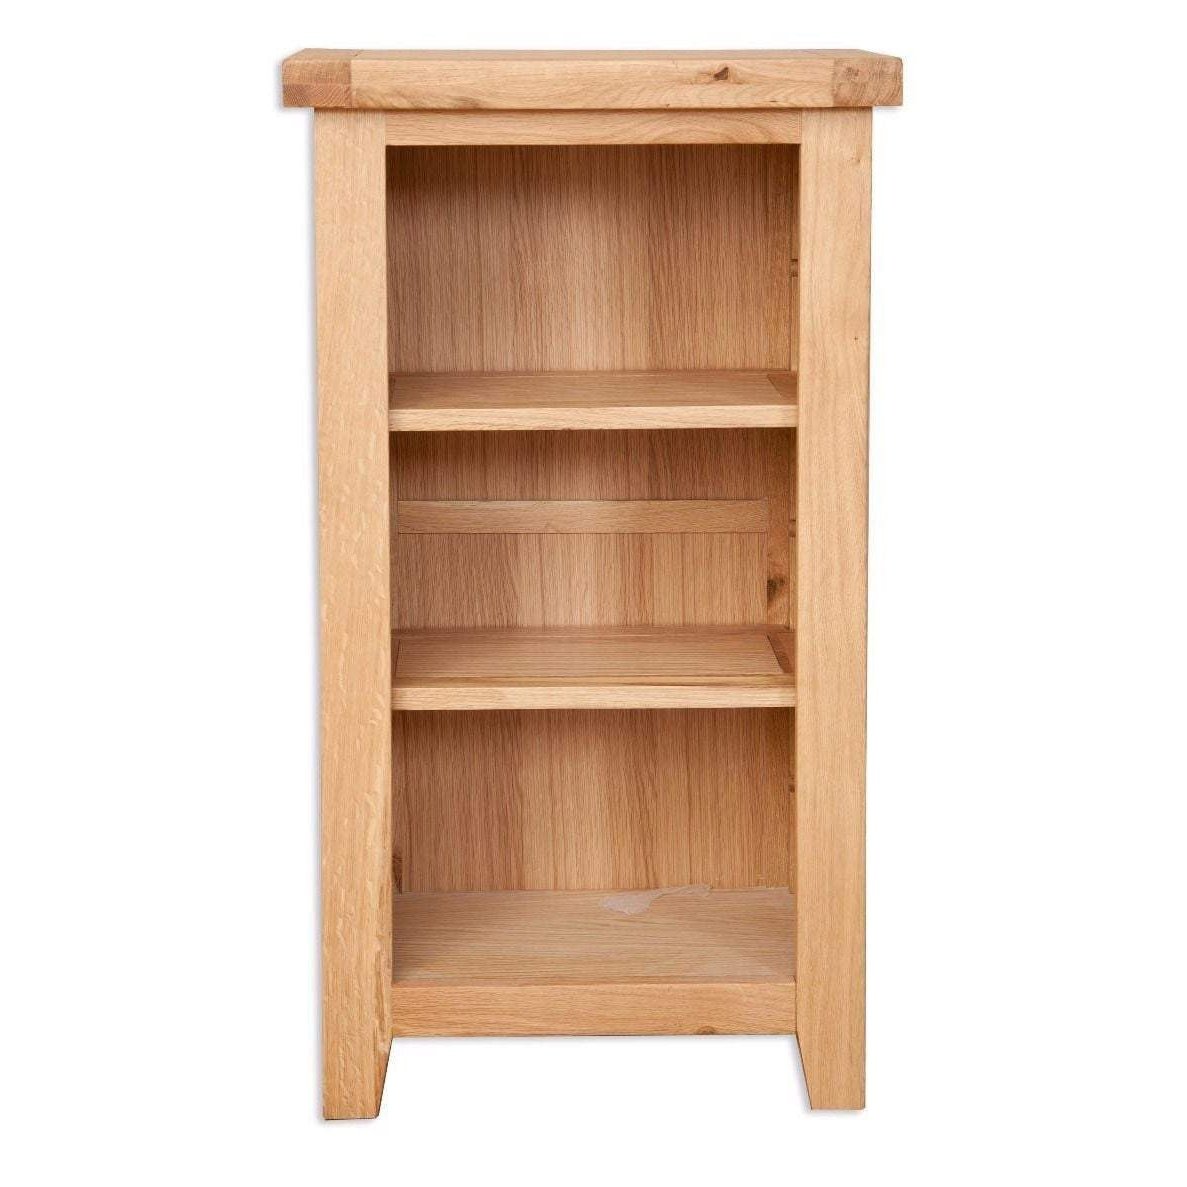 a brown wooden shelf filled with a wooden shelf 